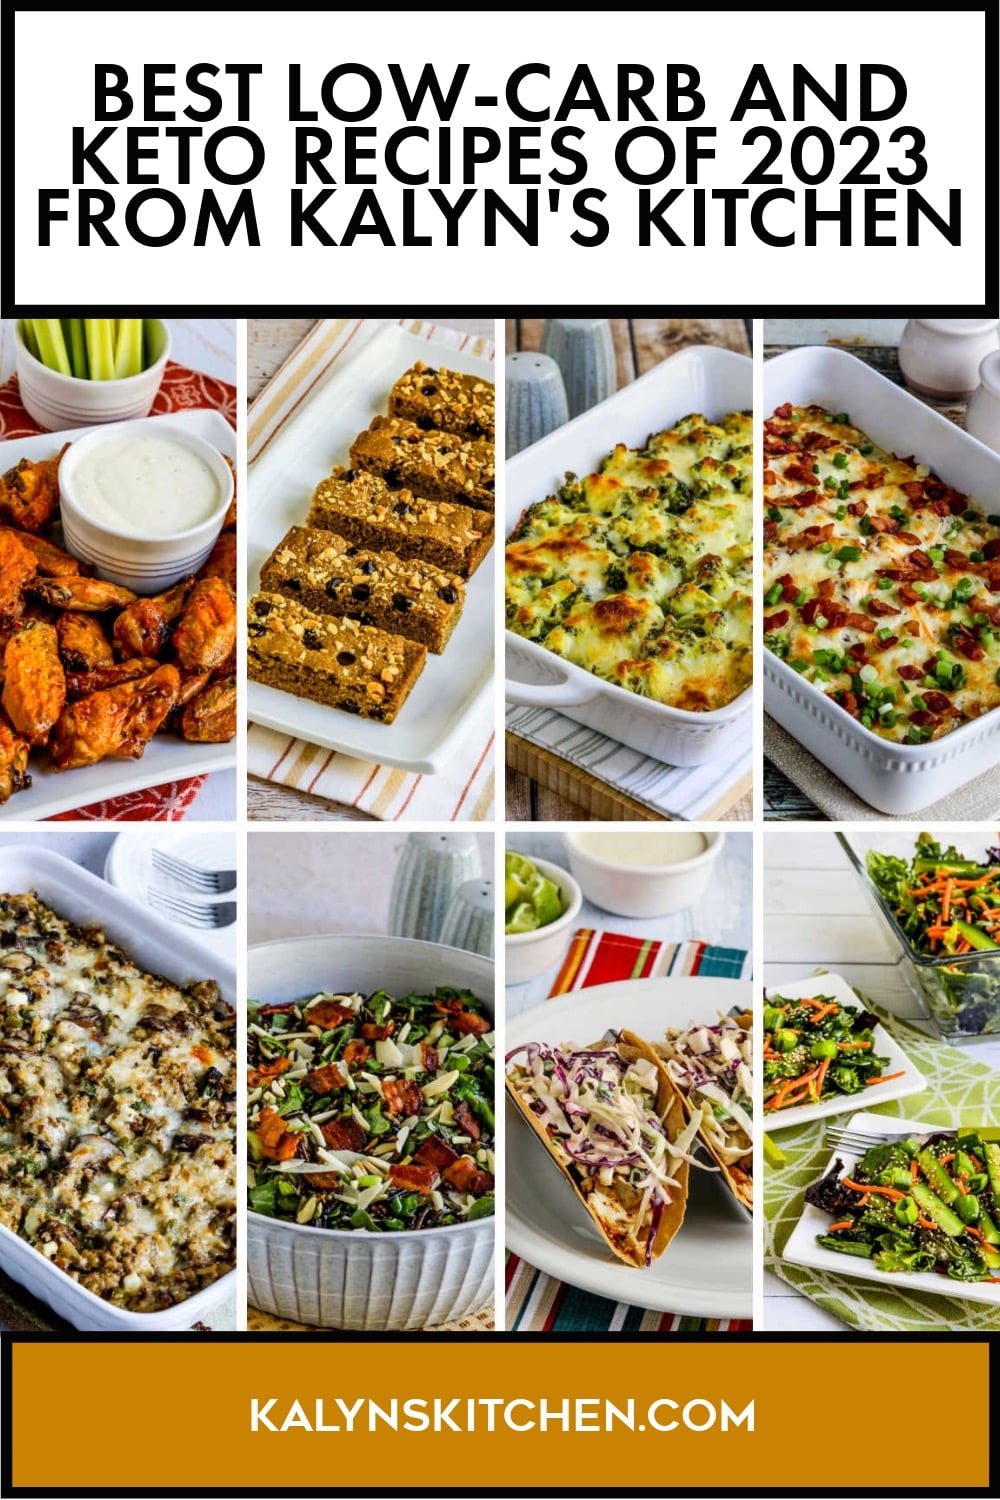 Pinterest image for Best Low-Carb and Keto Recipes of 2023 from Kalyn's Kitchen